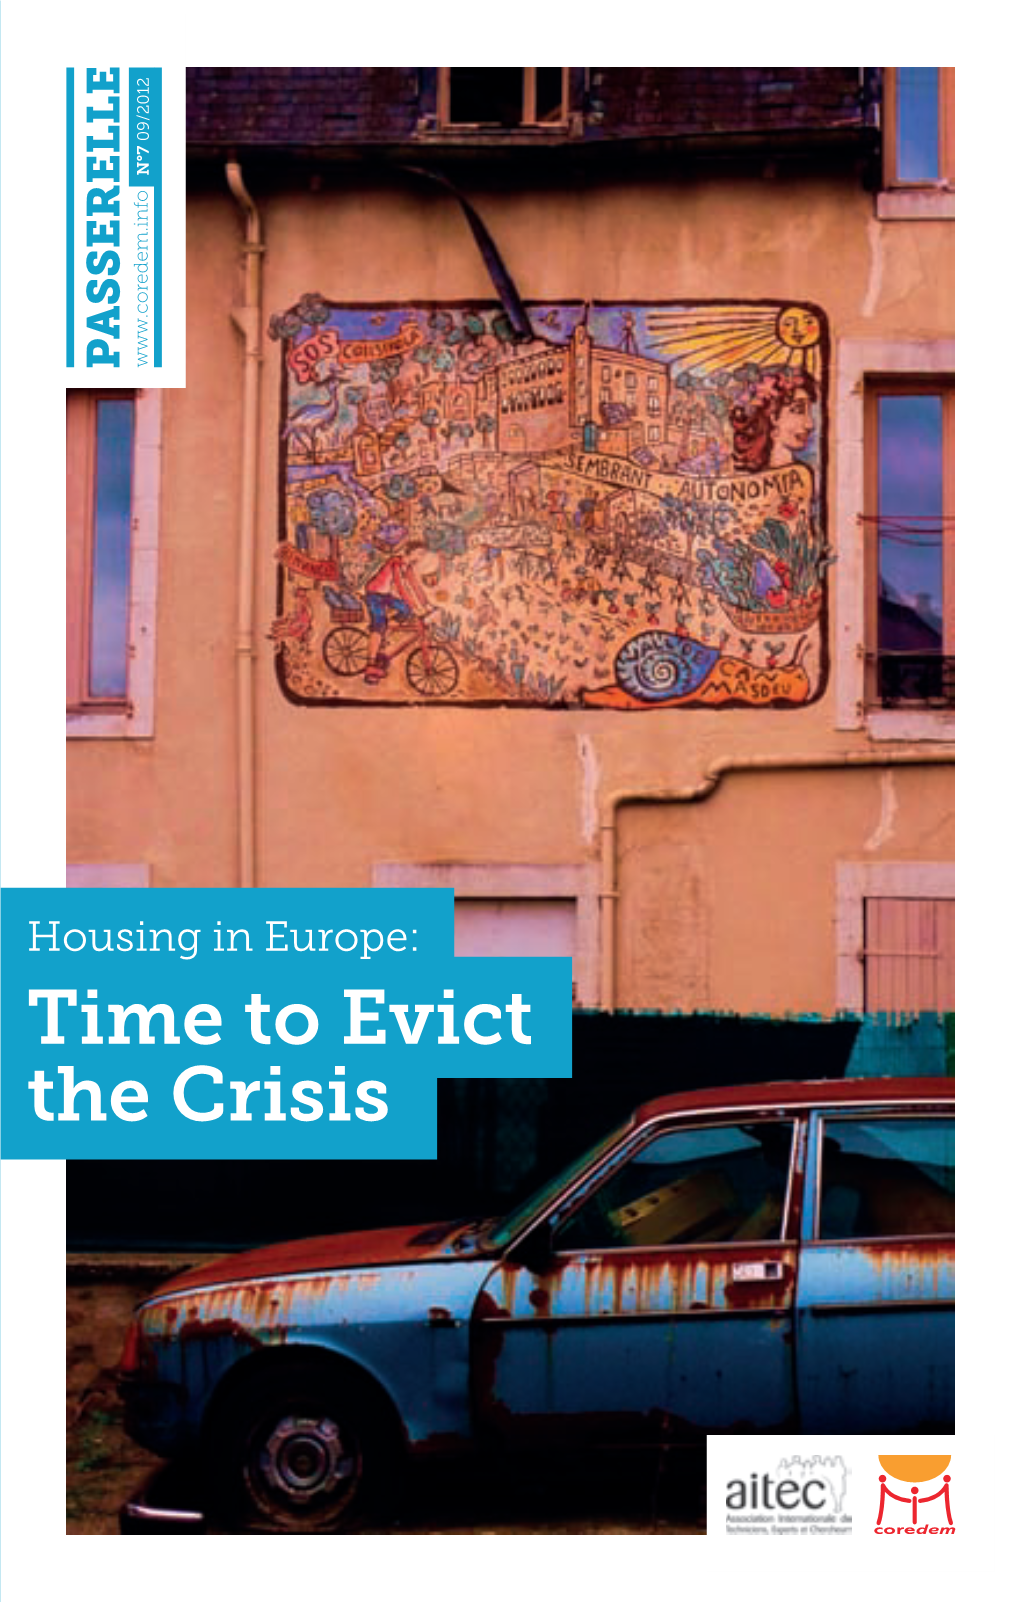 Housing in Europe: Time to Evict the Crisis